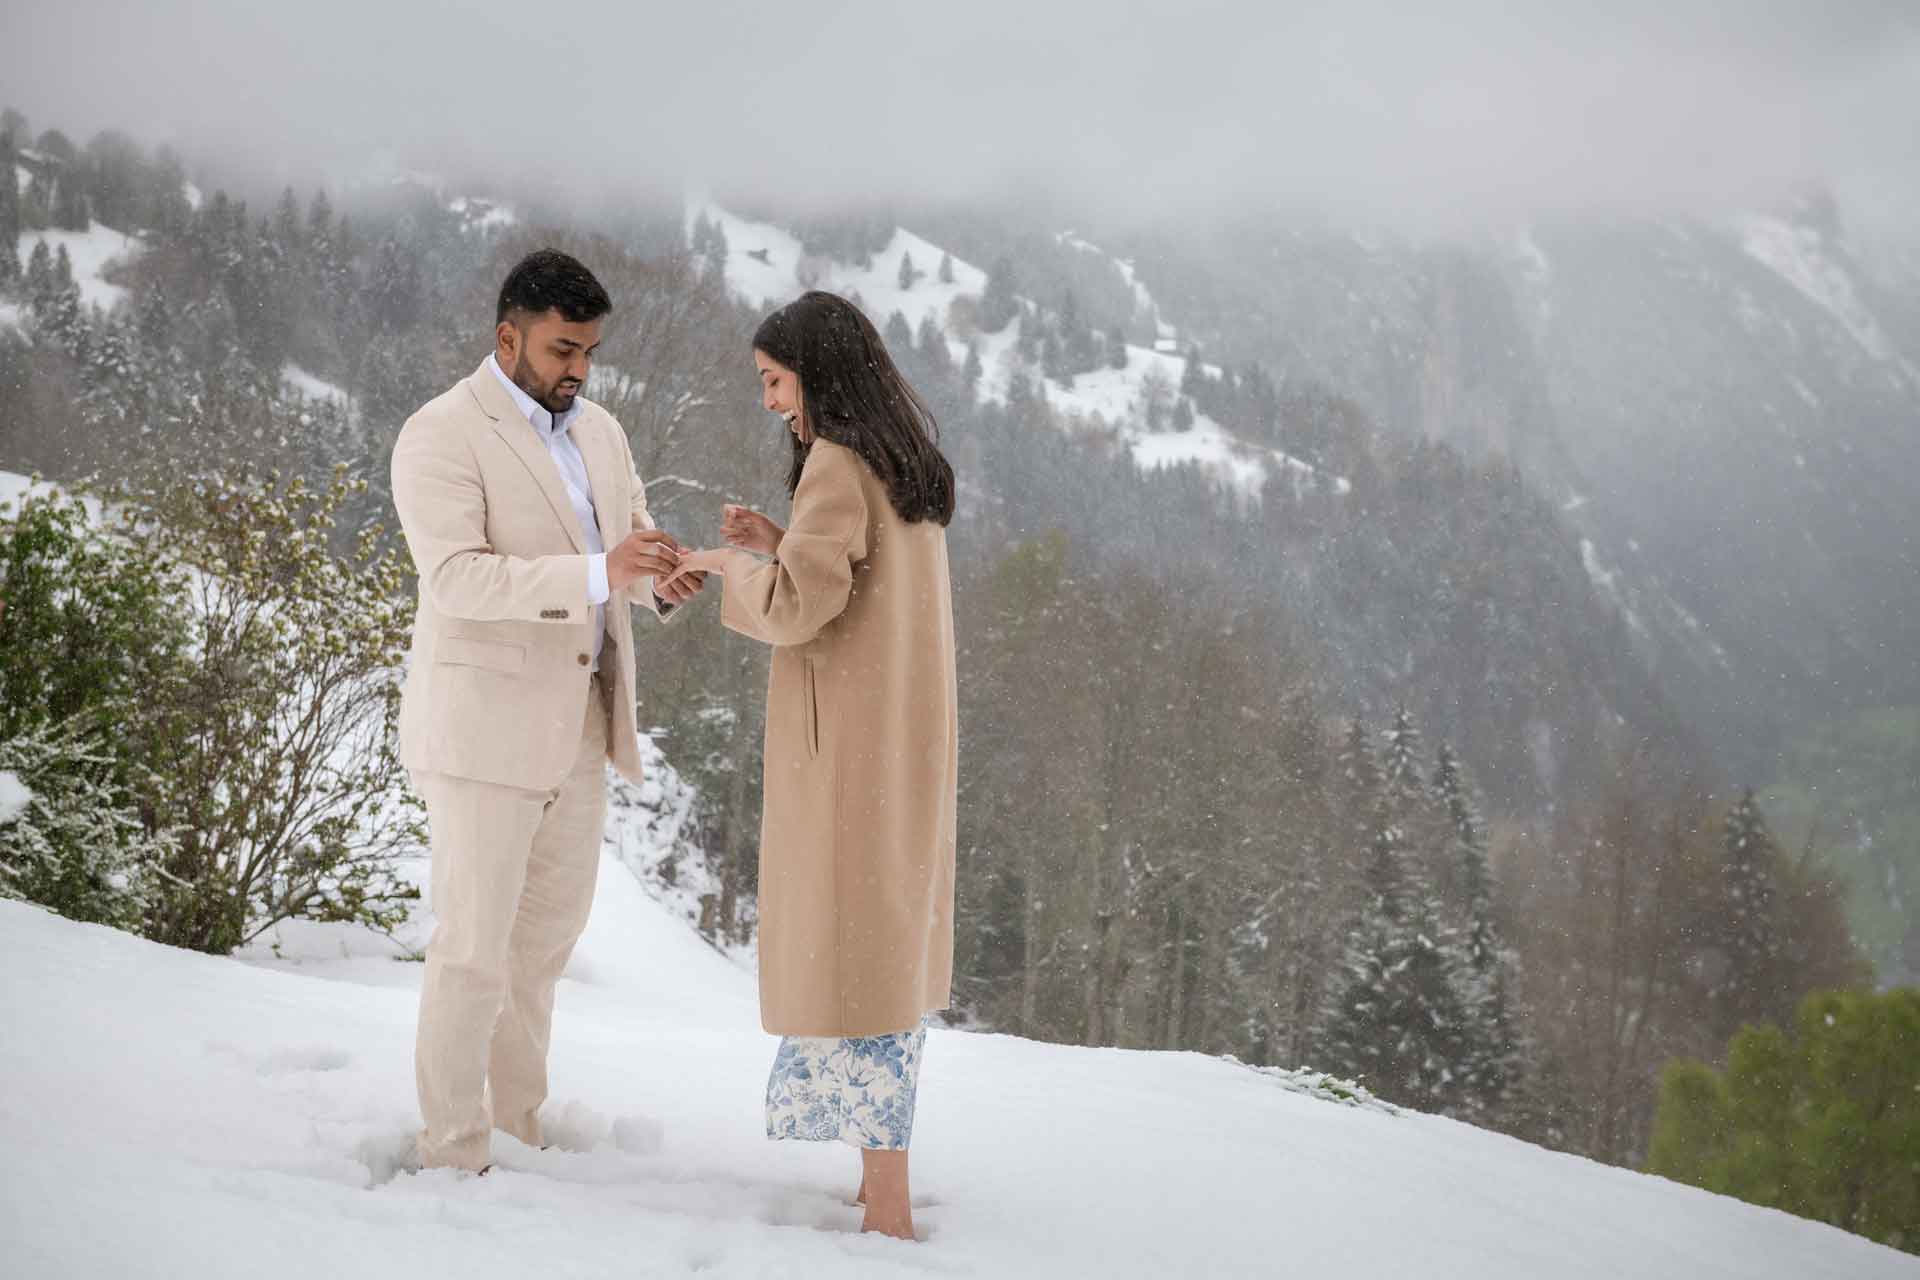 Surprise engagement in the snow